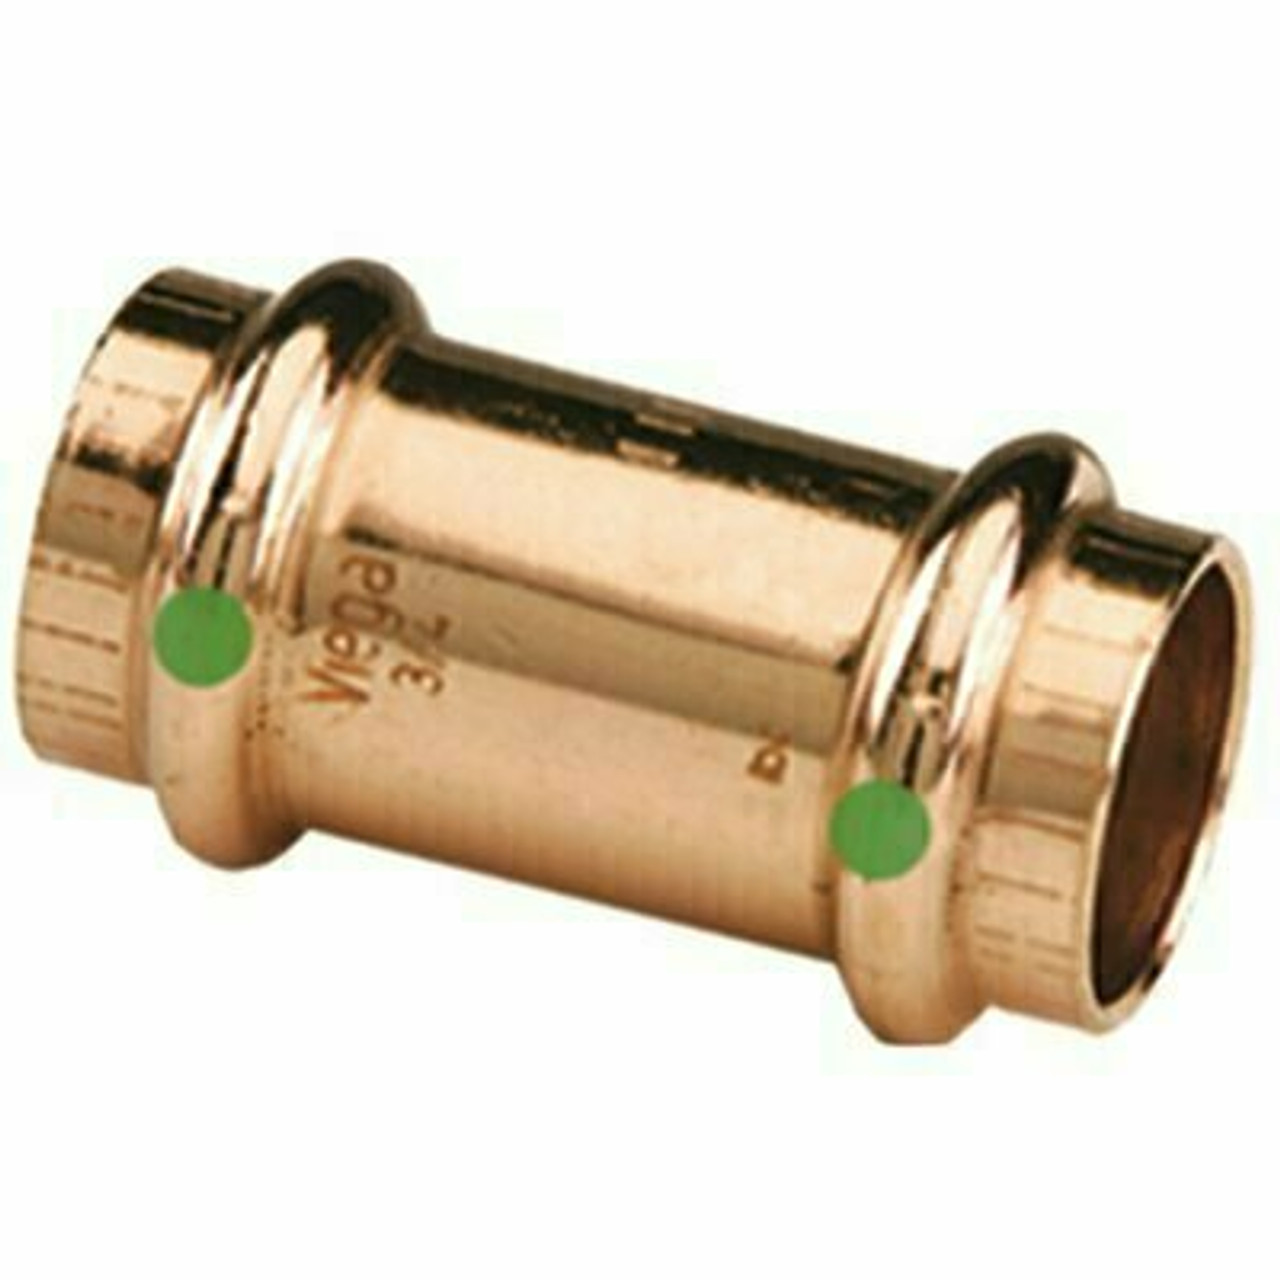 Viega 1/2 In. X 1/2 In. Copper Coupling With Stop